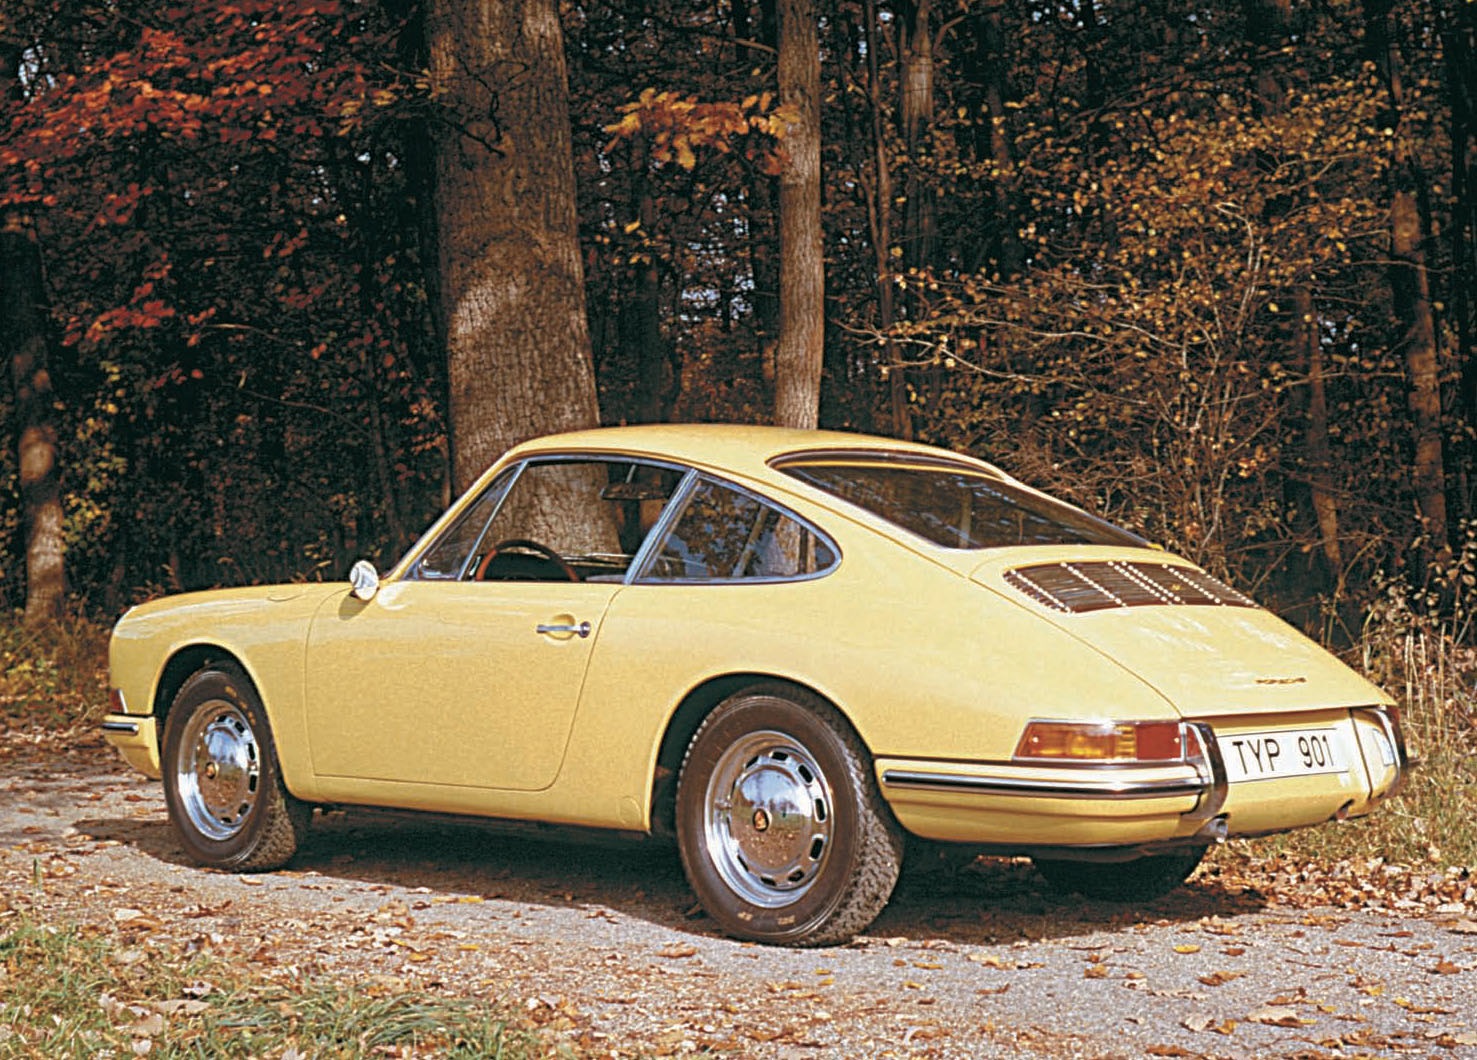 This was perhaps the most highly visible of all the early 911s as sales director Dieter Lenz took the car on a 50,000-kilometer sales tour around Europe. This fifthbuilt prototype ended its life when Porsche engineers dropped it from a crane to test its front-end crash strength. Porsche Archiv